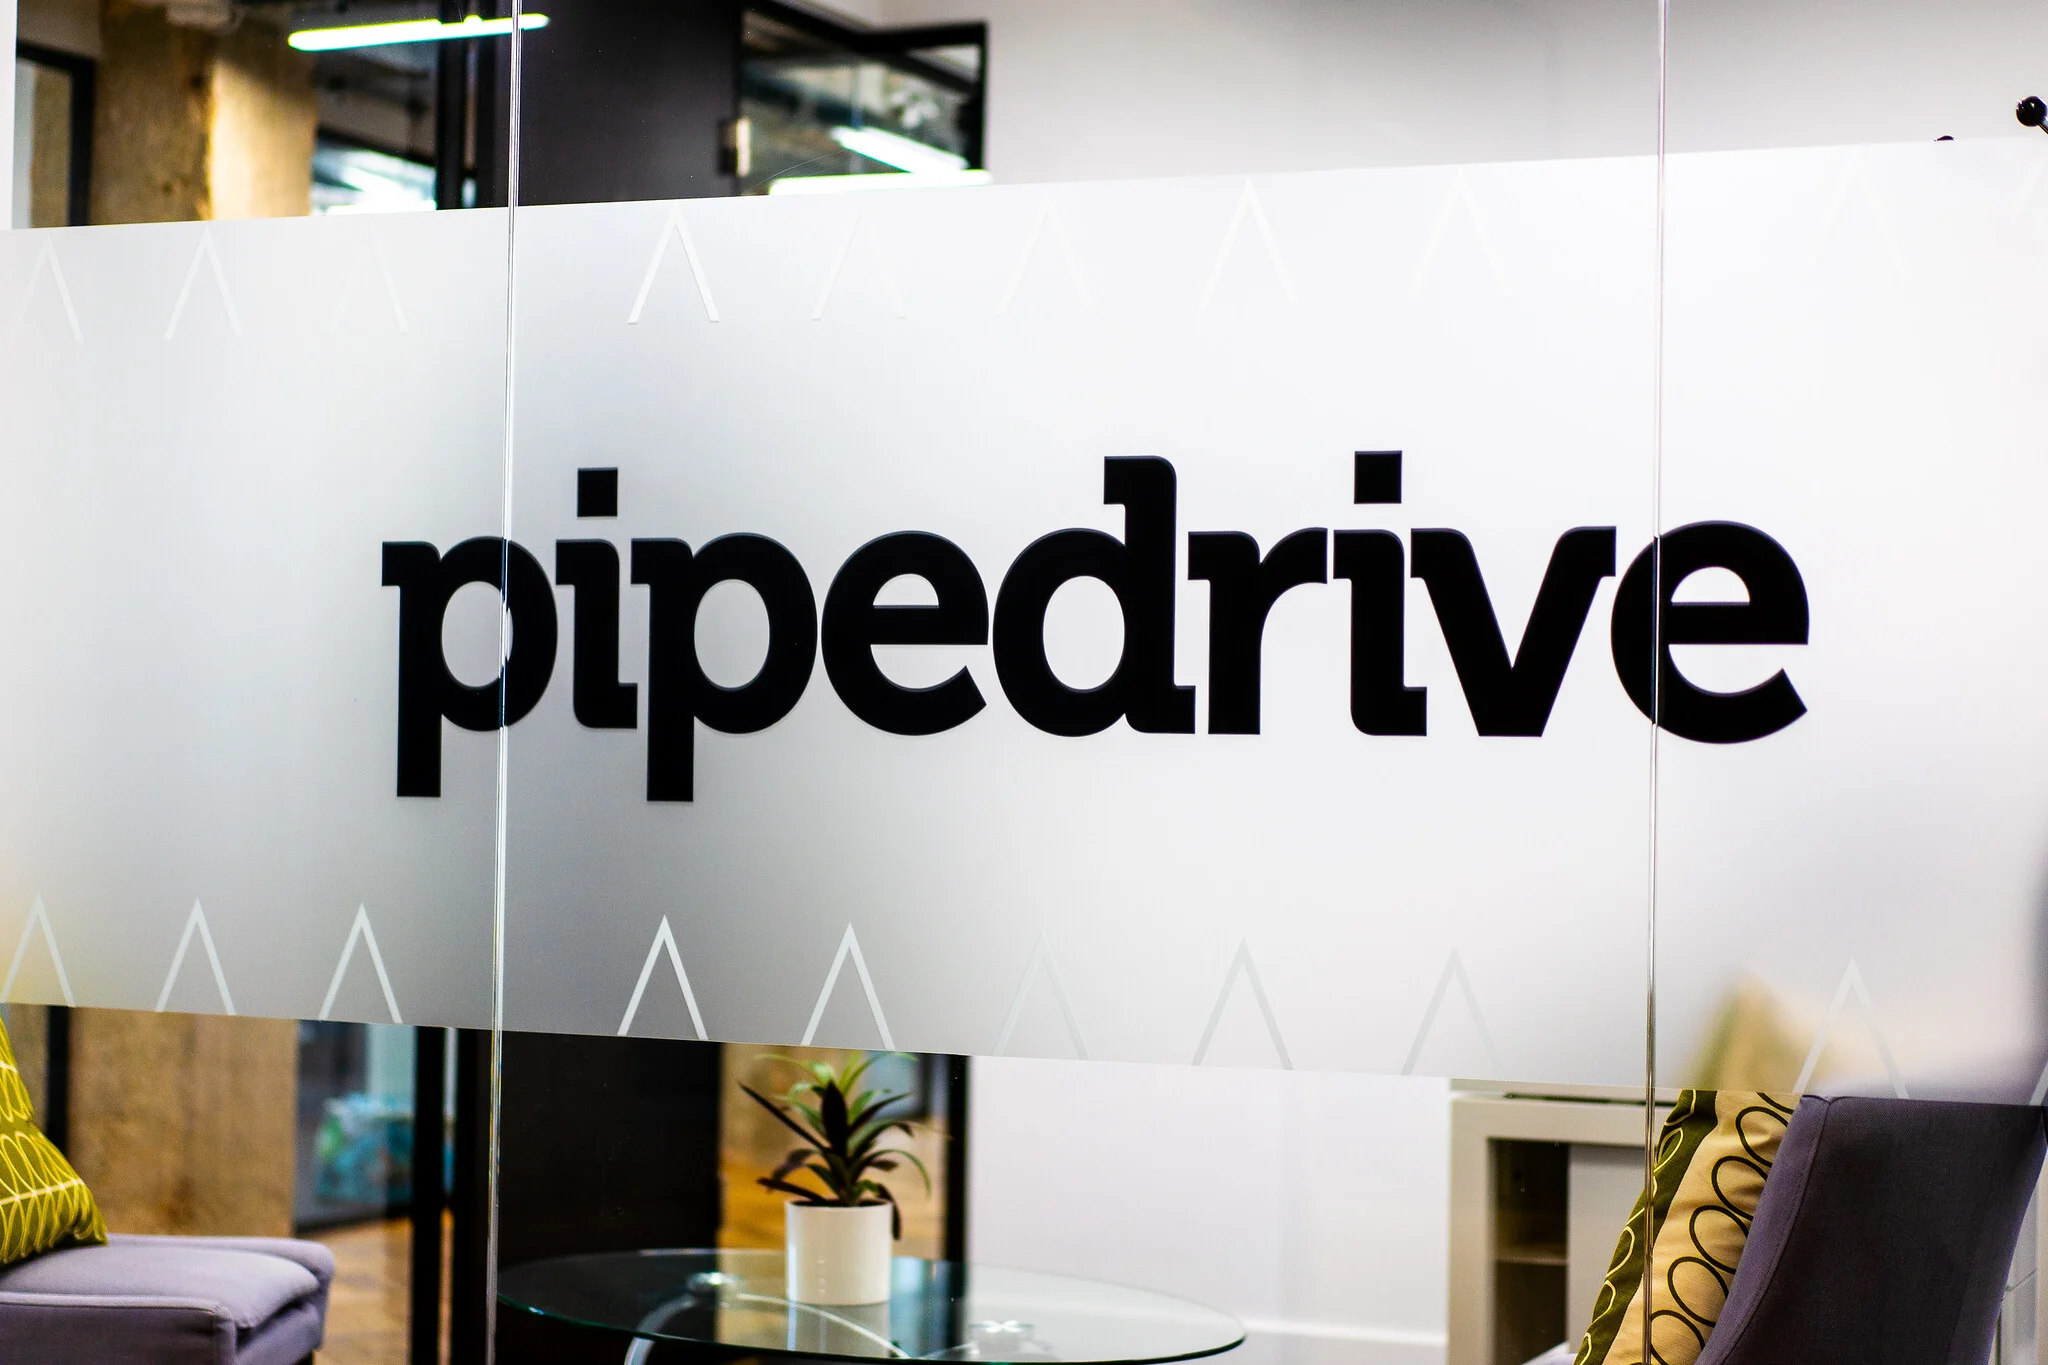 review pipedrive